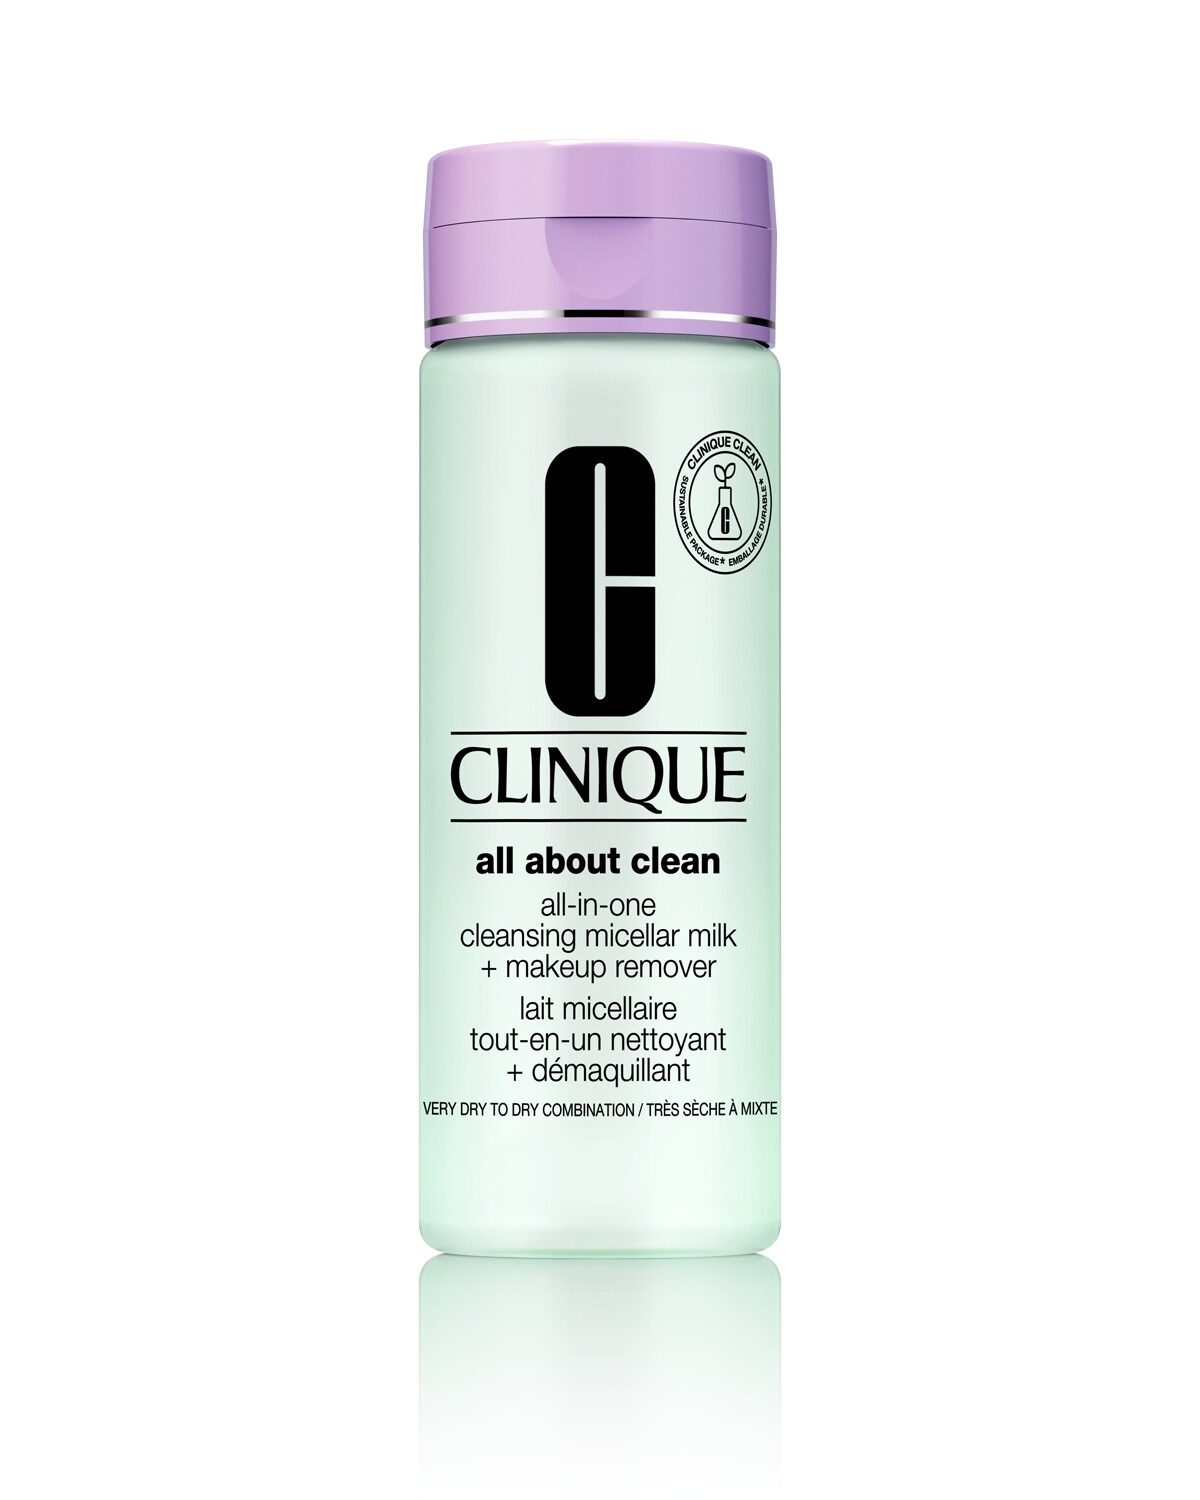 All-in-One Cleansing Milk + Makeup Remover <Skin Type 1 and 2>